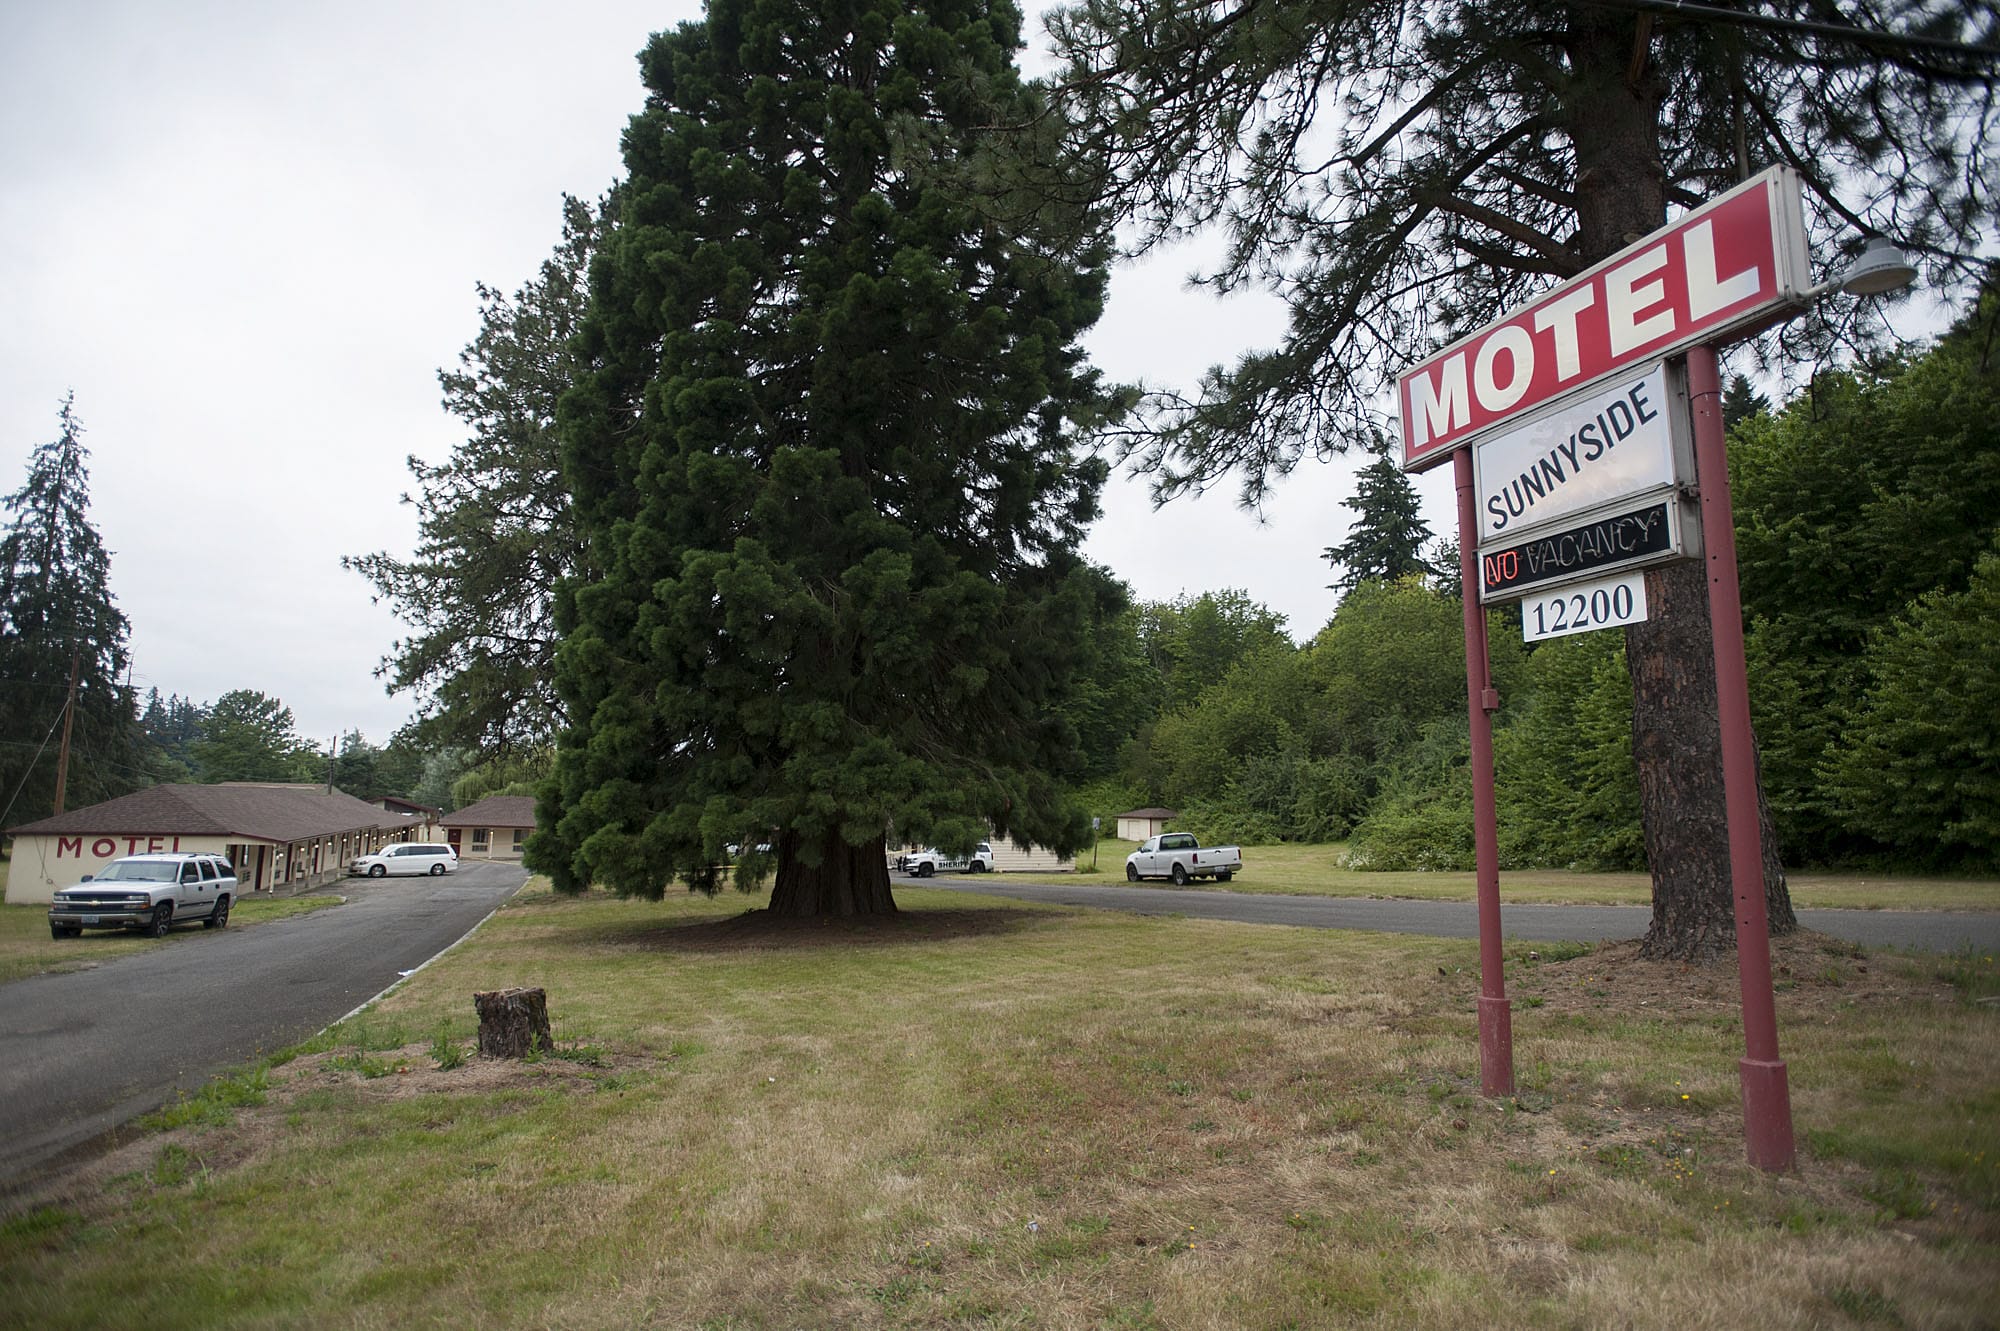 Officials were on the scene Wednesday morning, June 29, 2016 at Sunnyside Motel in Salmon Creek.